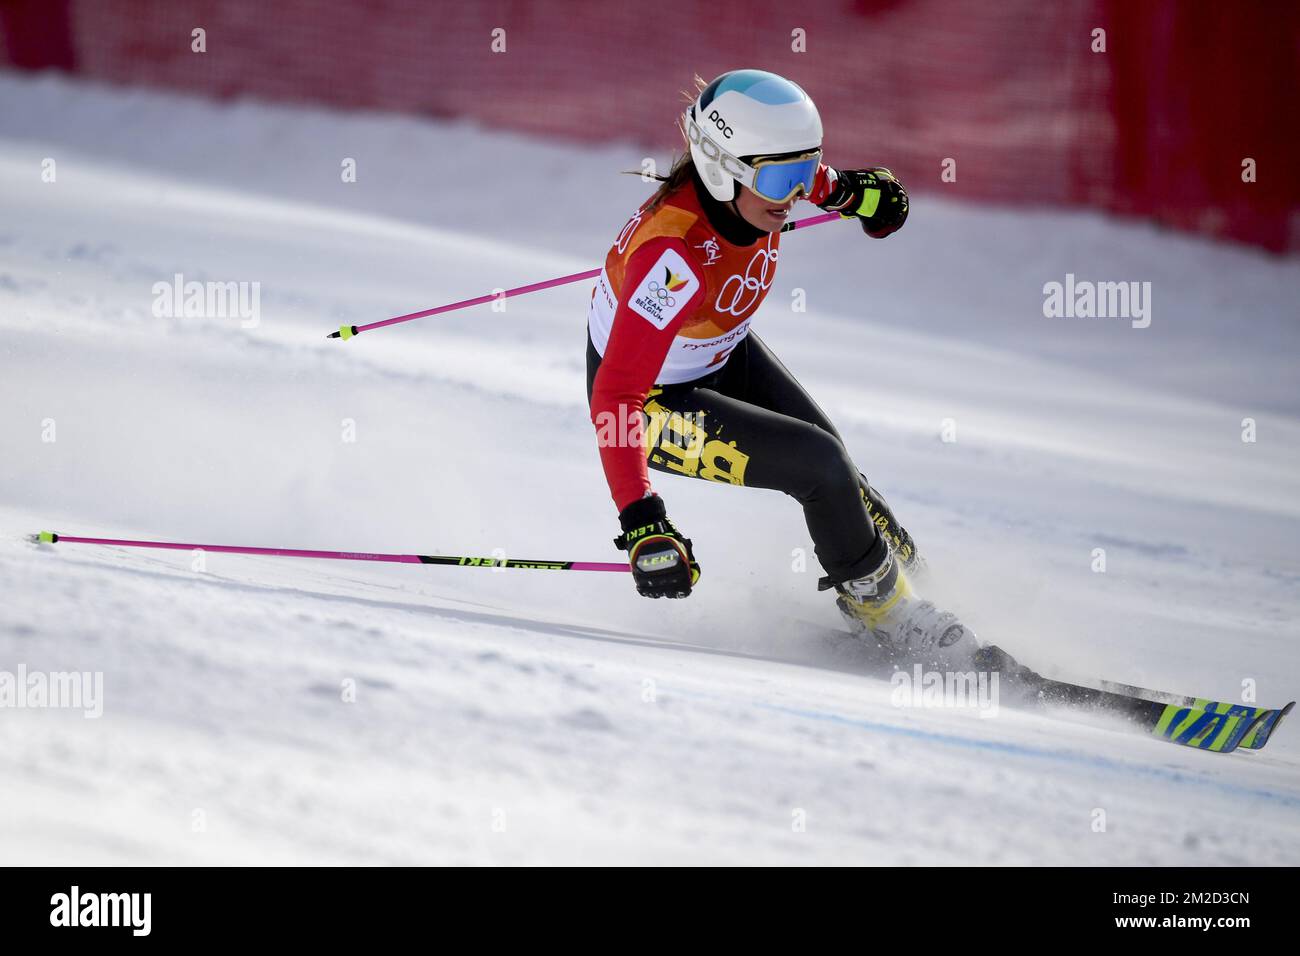 Belgian skier Kim Vanreusel pictured in action during the women's giant slalom skiing event, at the XXIII Olympic Winter Games, Thursday 15 February 2018, in Pyeongchang, South Korea. The Winter Olympics are taking place from 9 February to 25 February in Pyeongchang County, South Korea. BELGA PHOTO DIRK WAEM Stock Photo